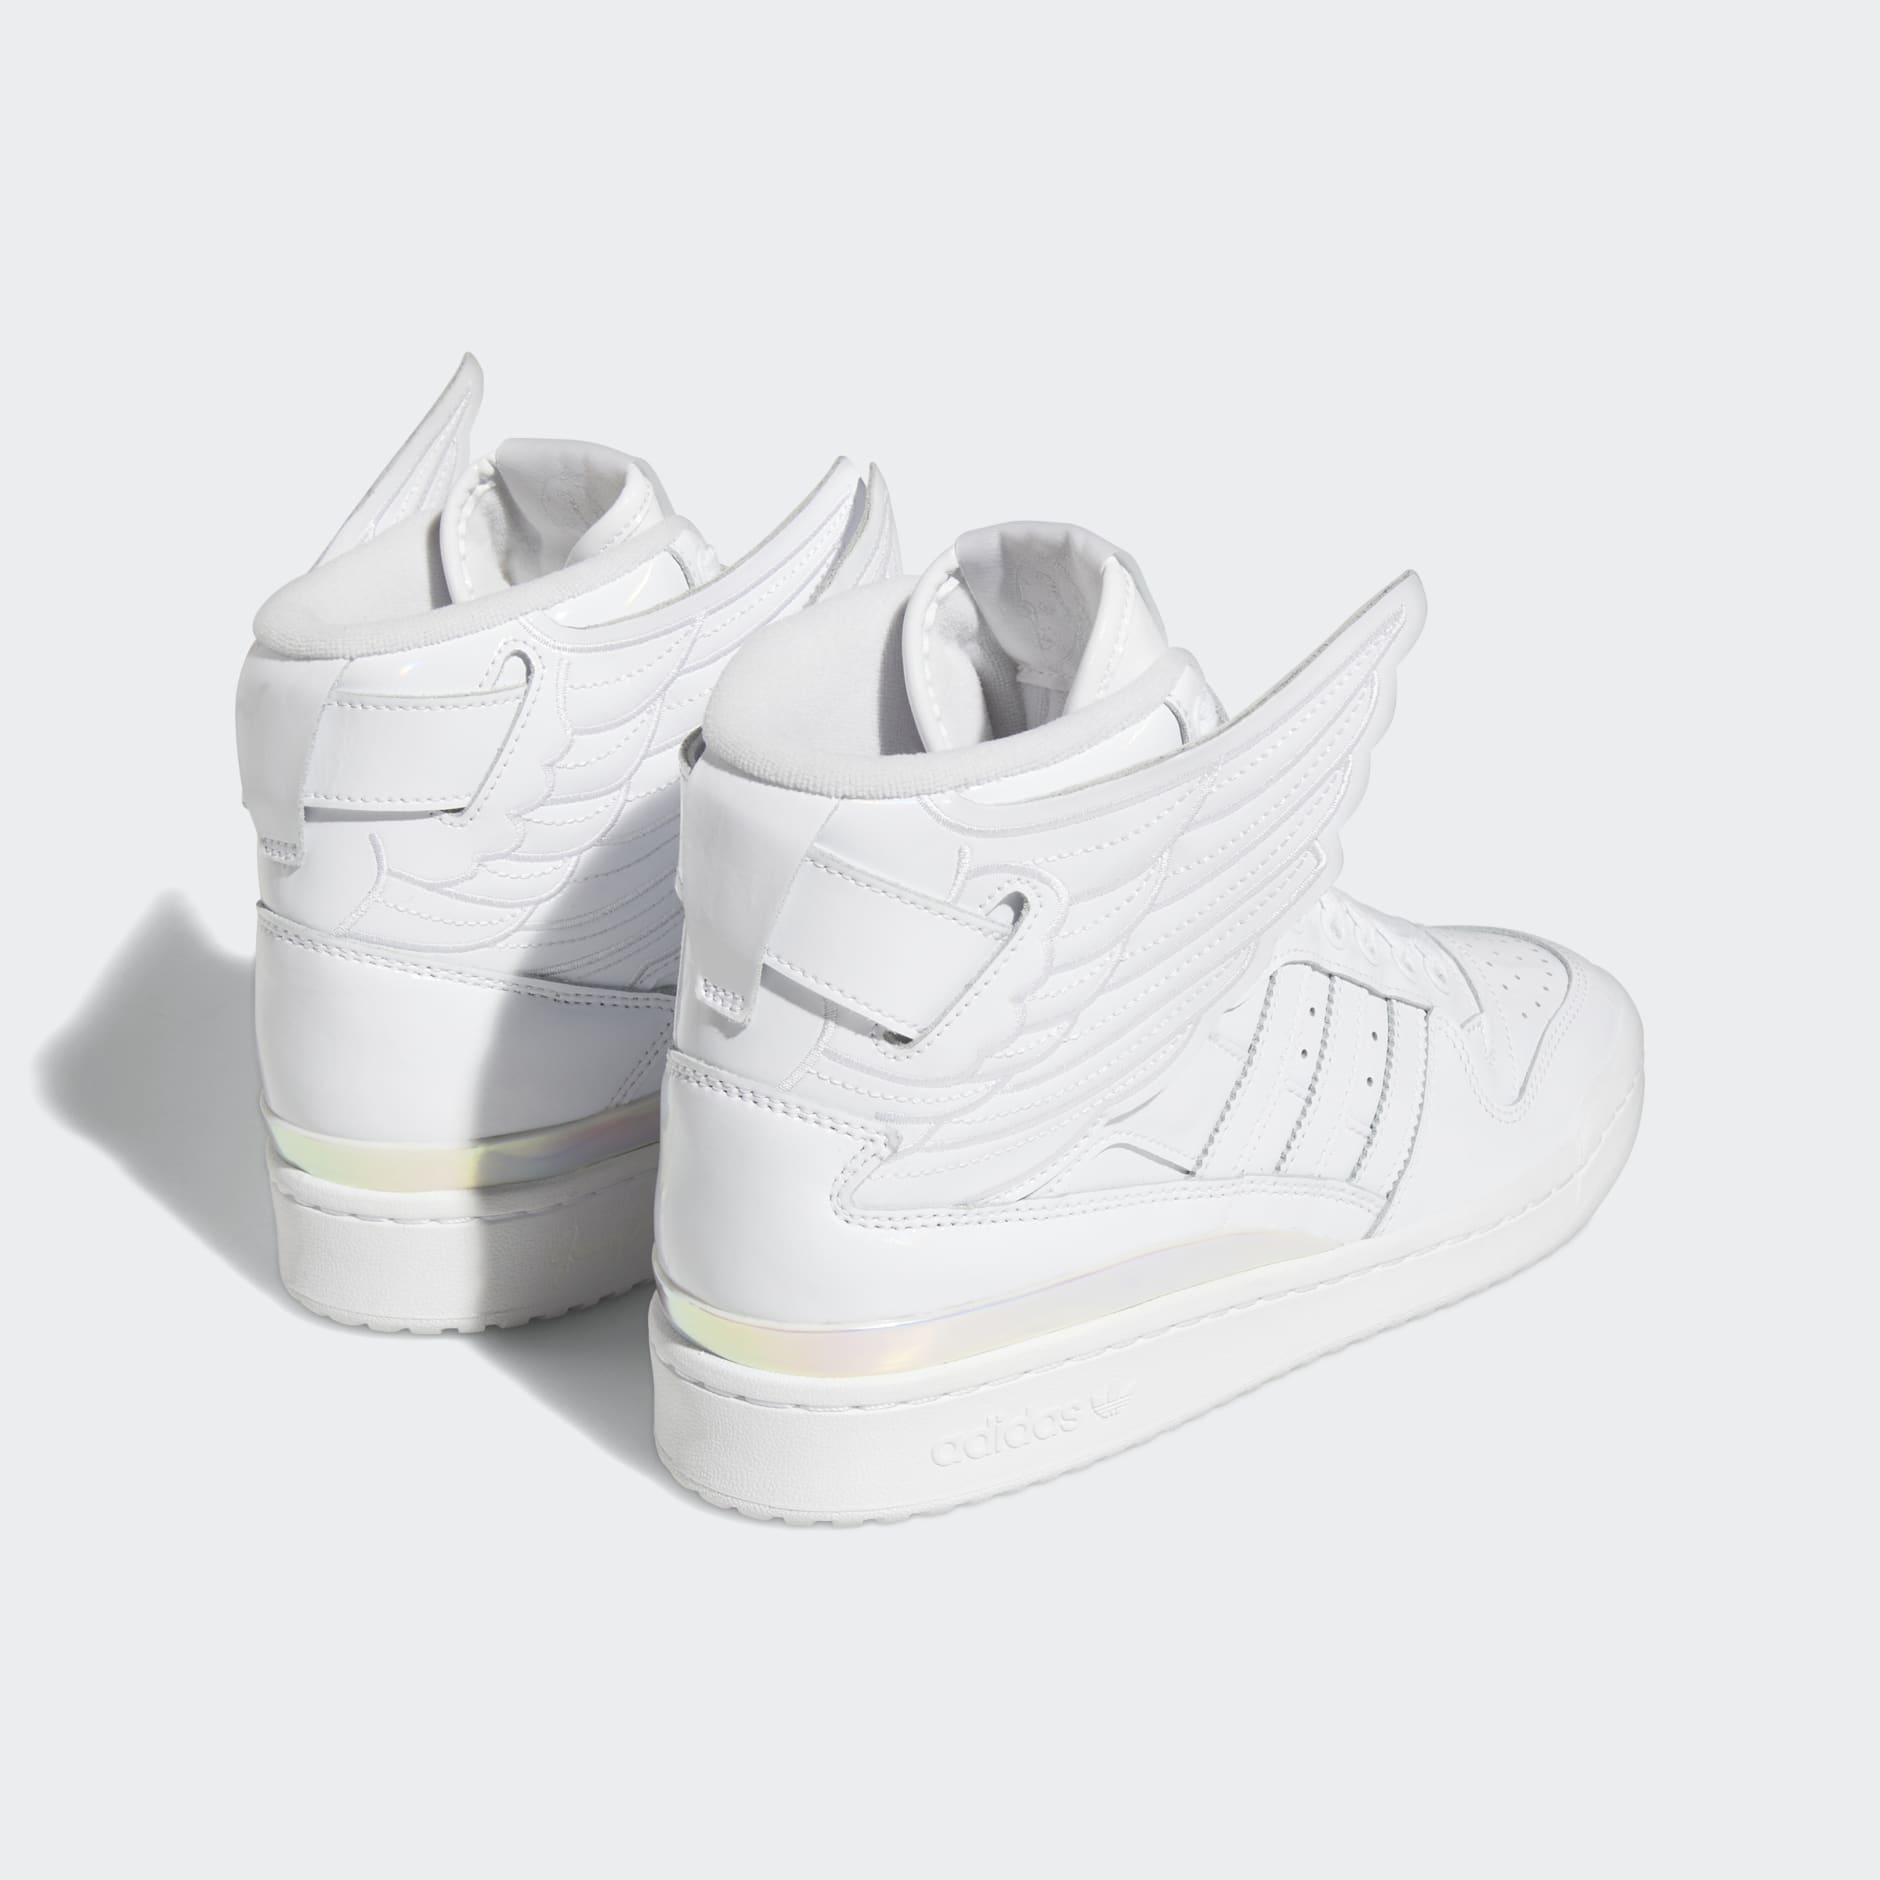 Shoes - Jeremy Scott Opal Wings 4.0 Shoes - White | adidas South Africa